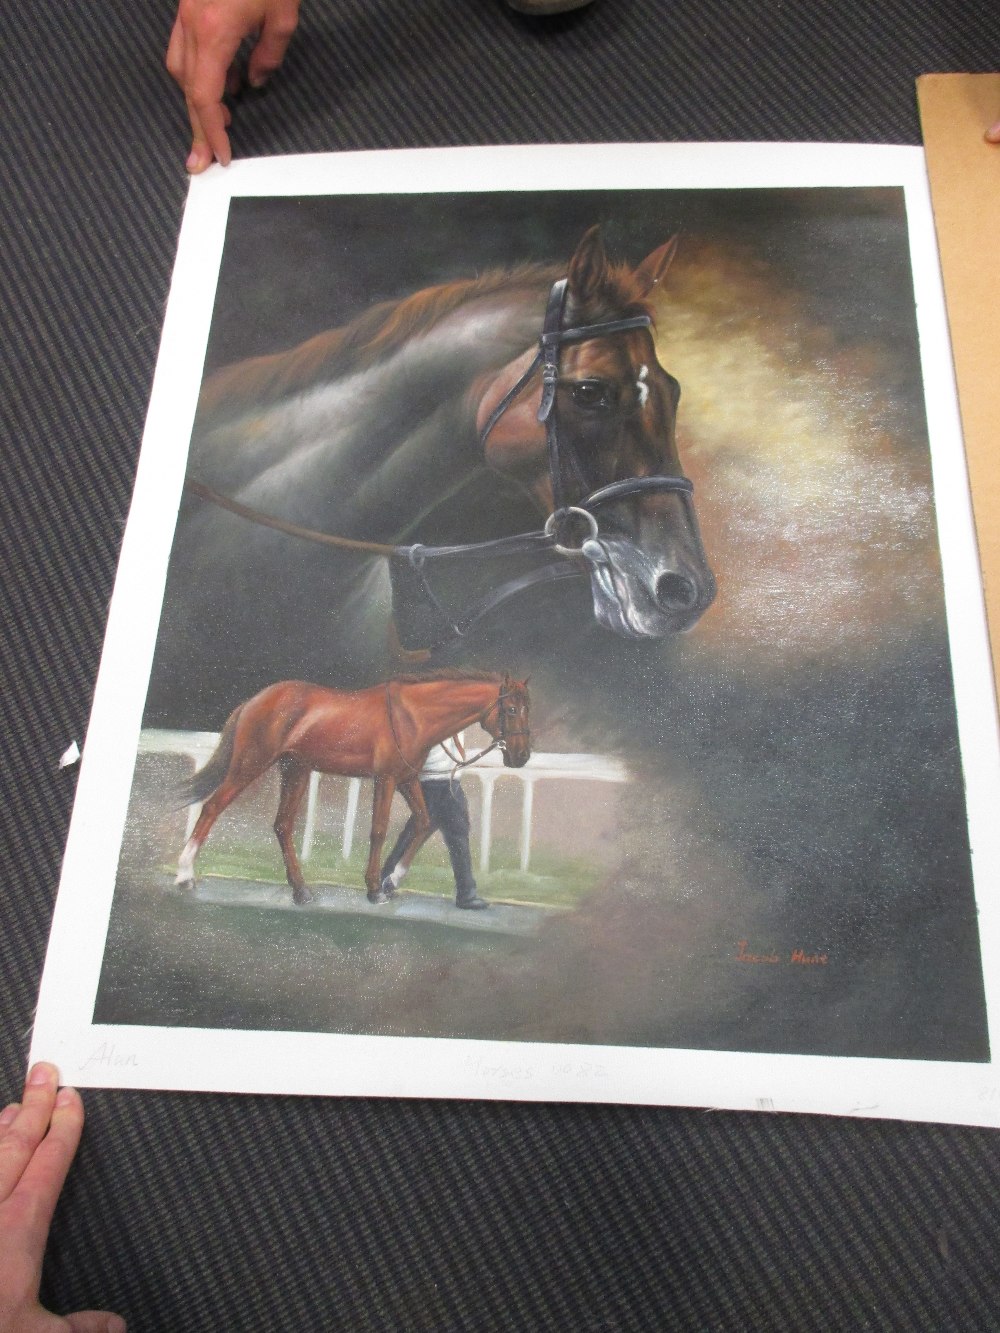 Jacob Hunt, in the horse racing paddock, oil on canvas, unframed - Image 2 of 5